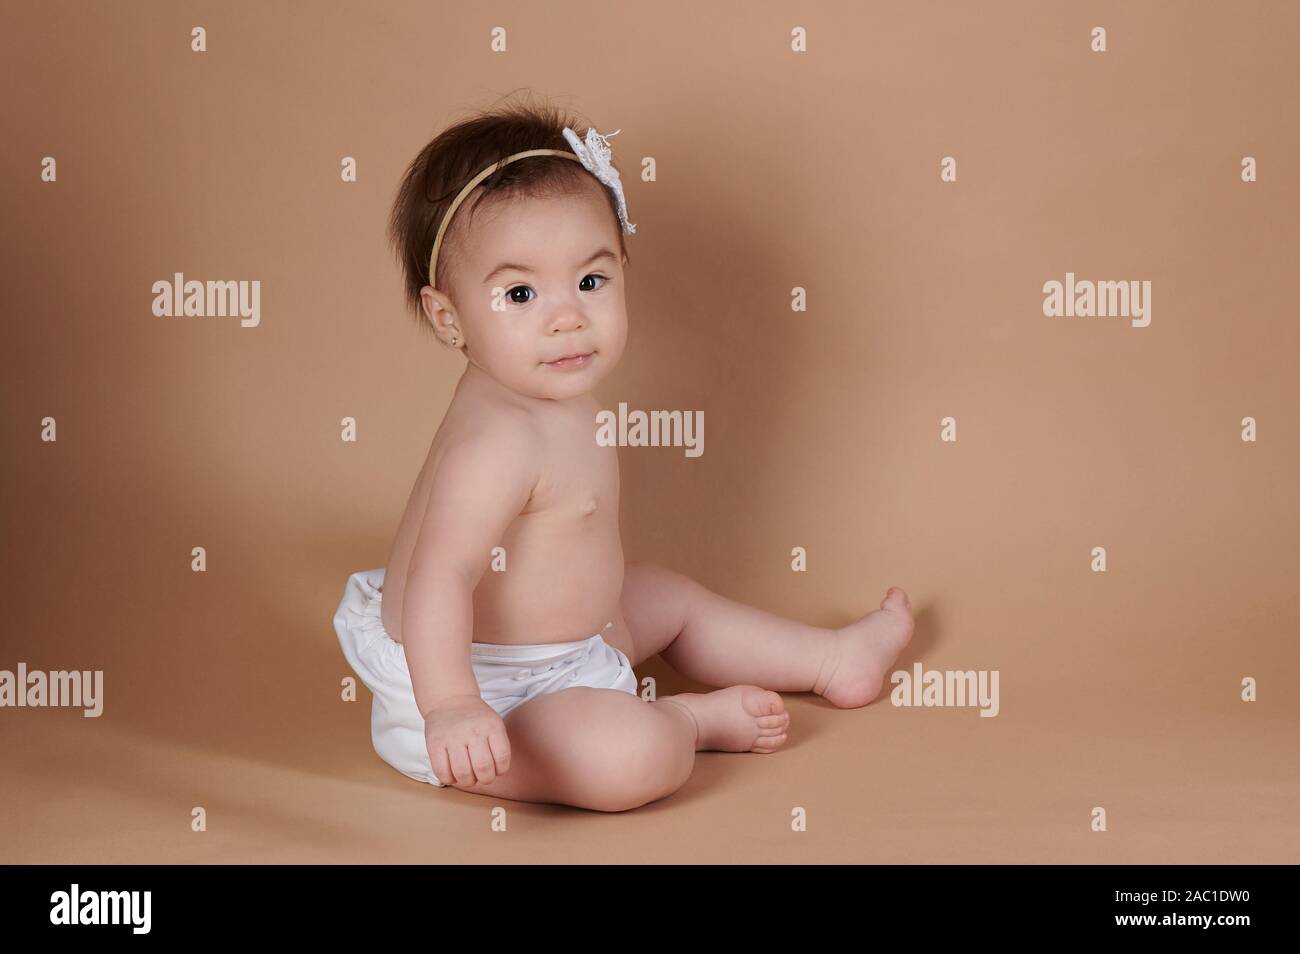 One baby girl sitting on brown color studio background Stock Photo